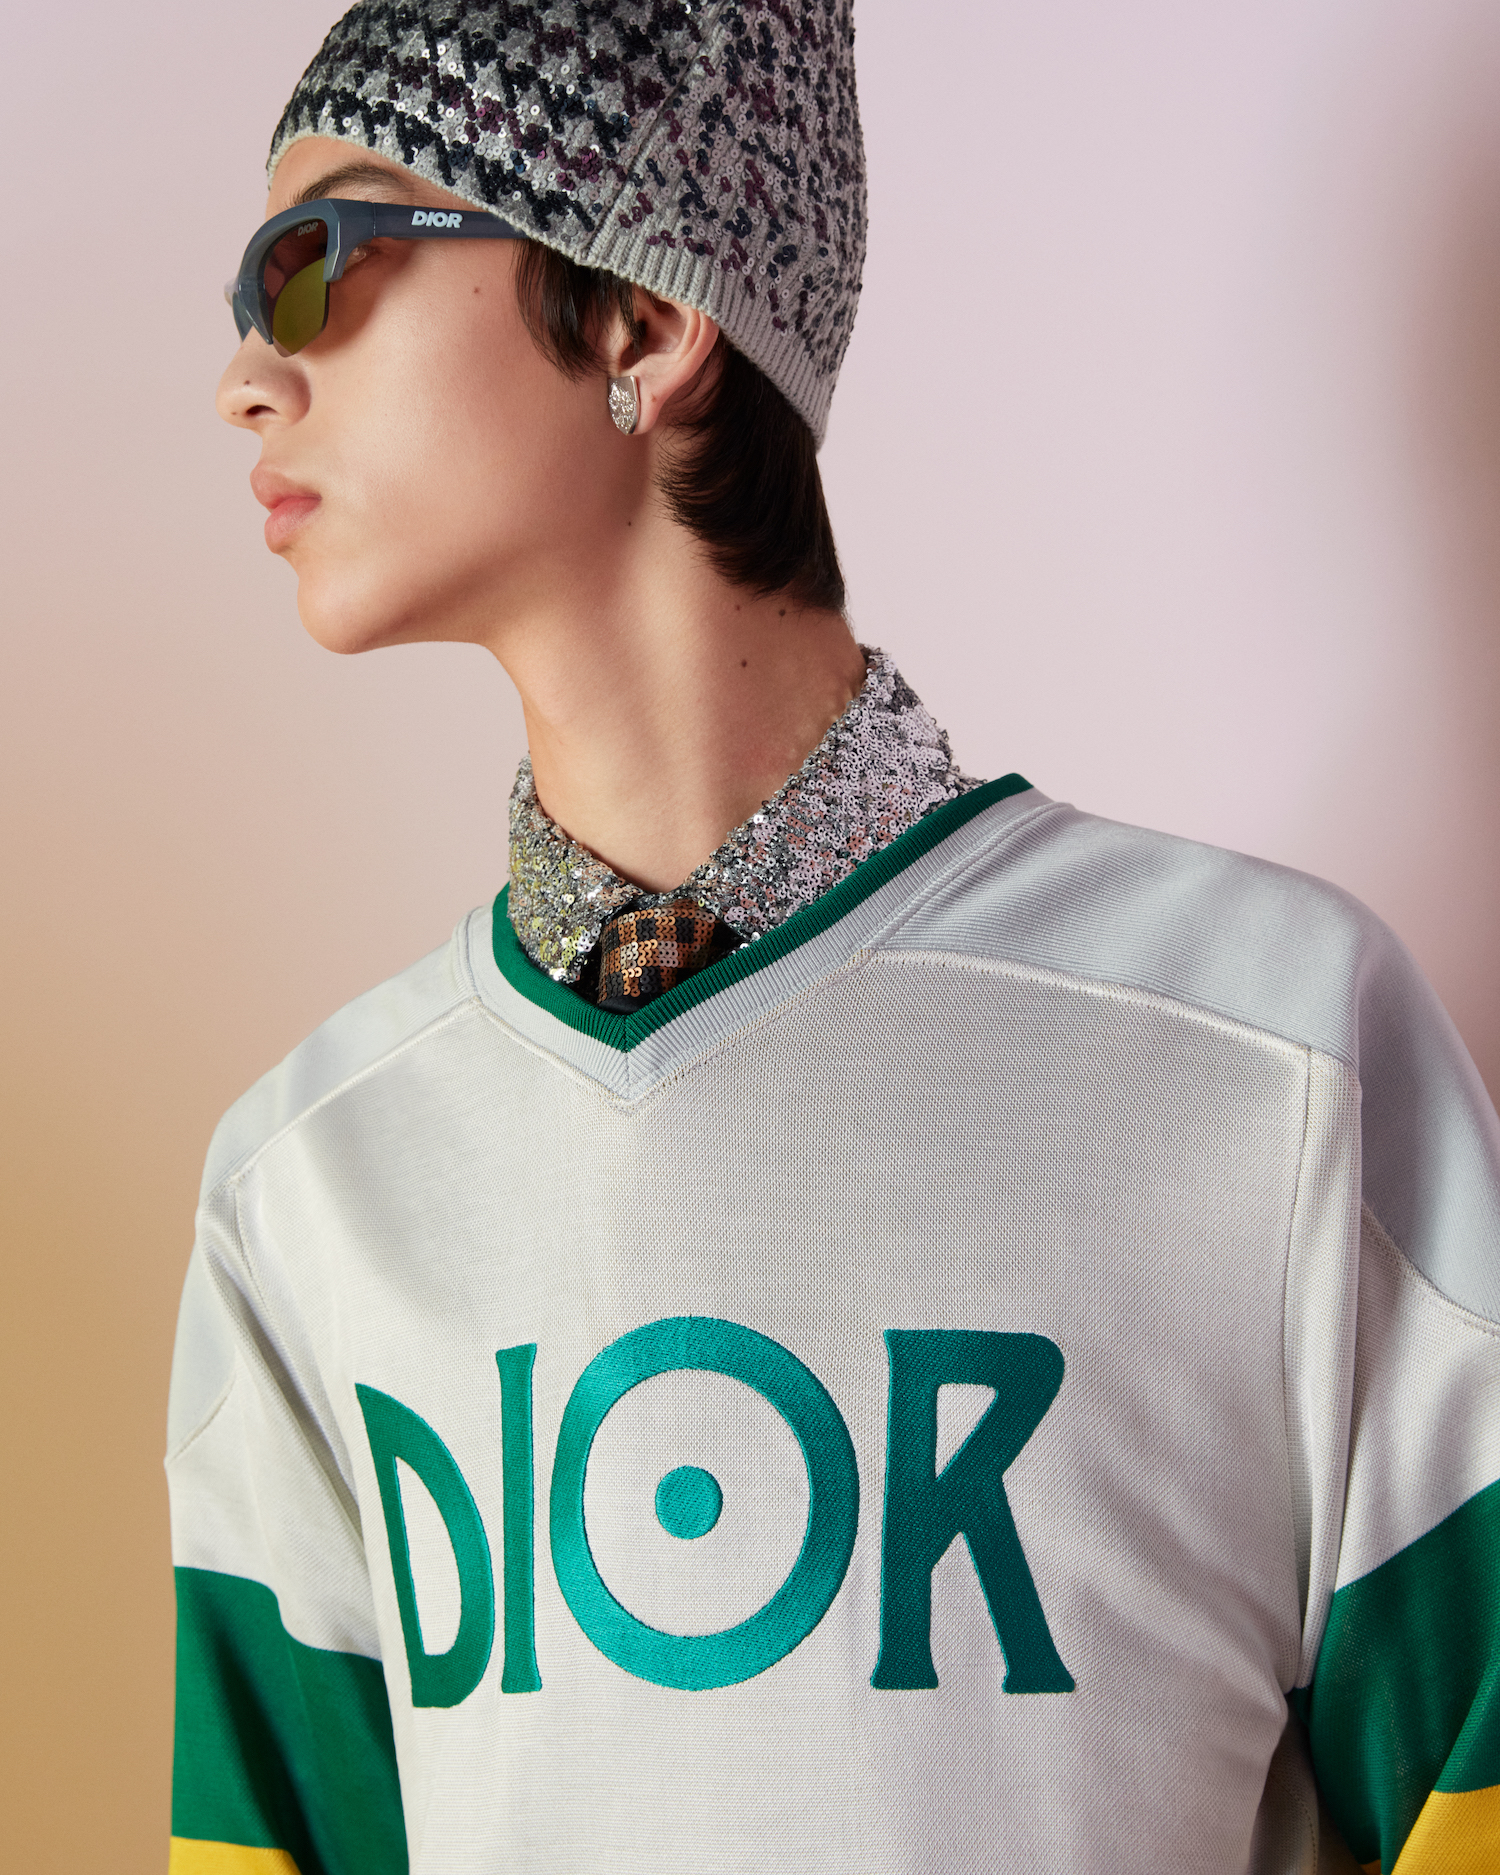 Dior Taps Into the Beat Generation